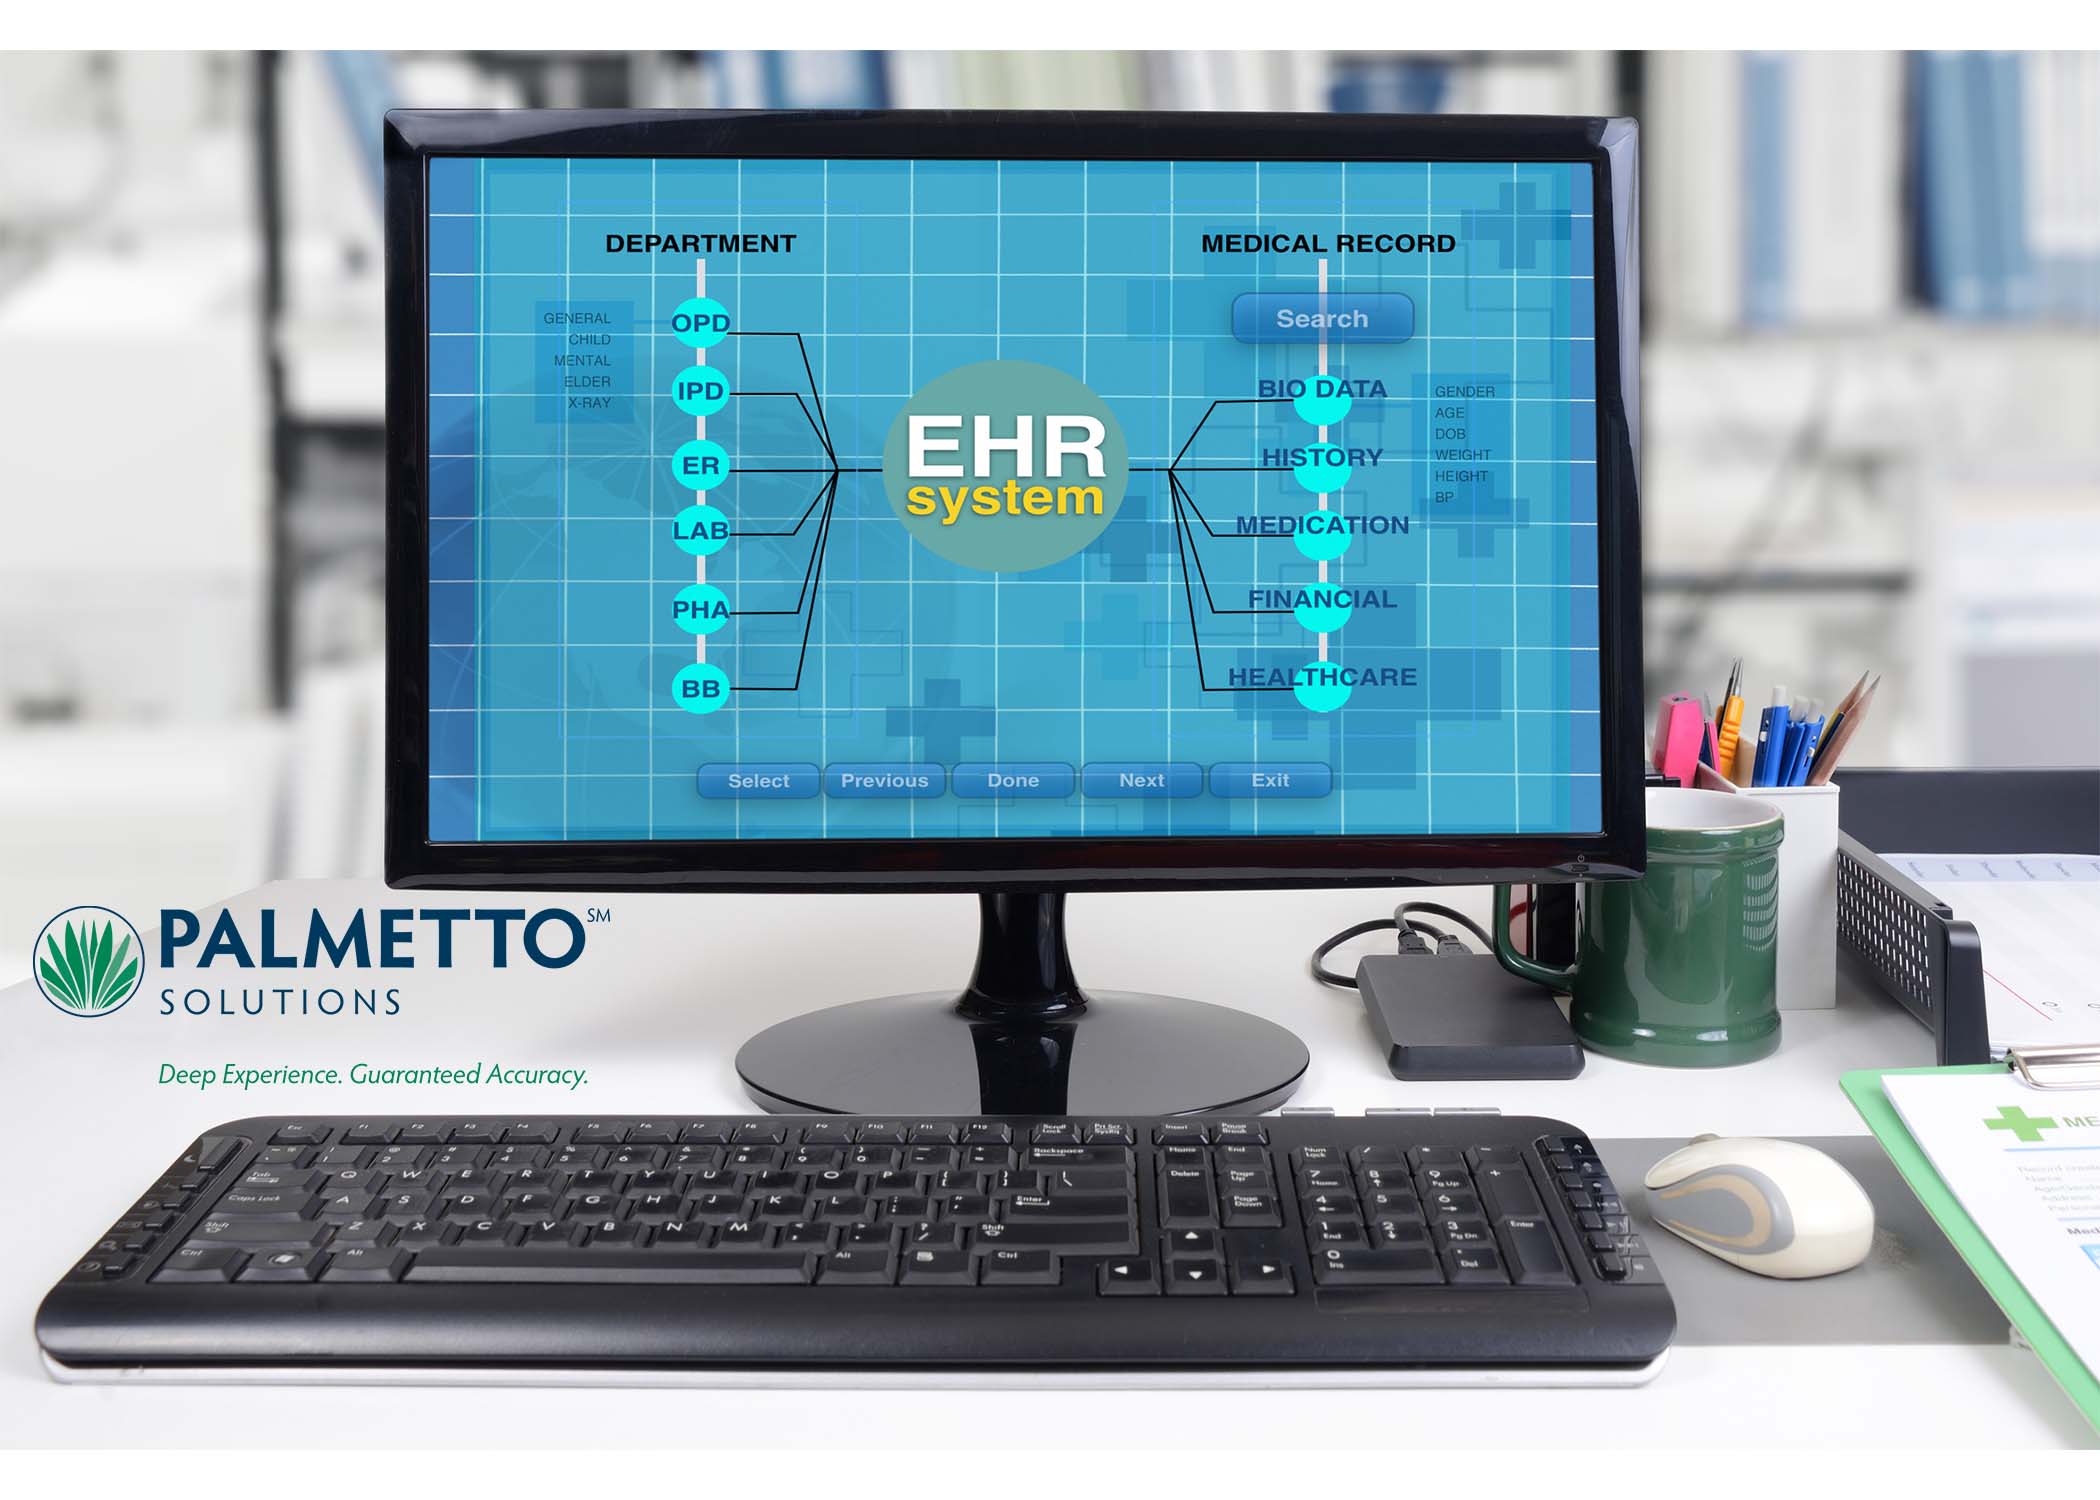 Data Archive – Extension Of The EHR?